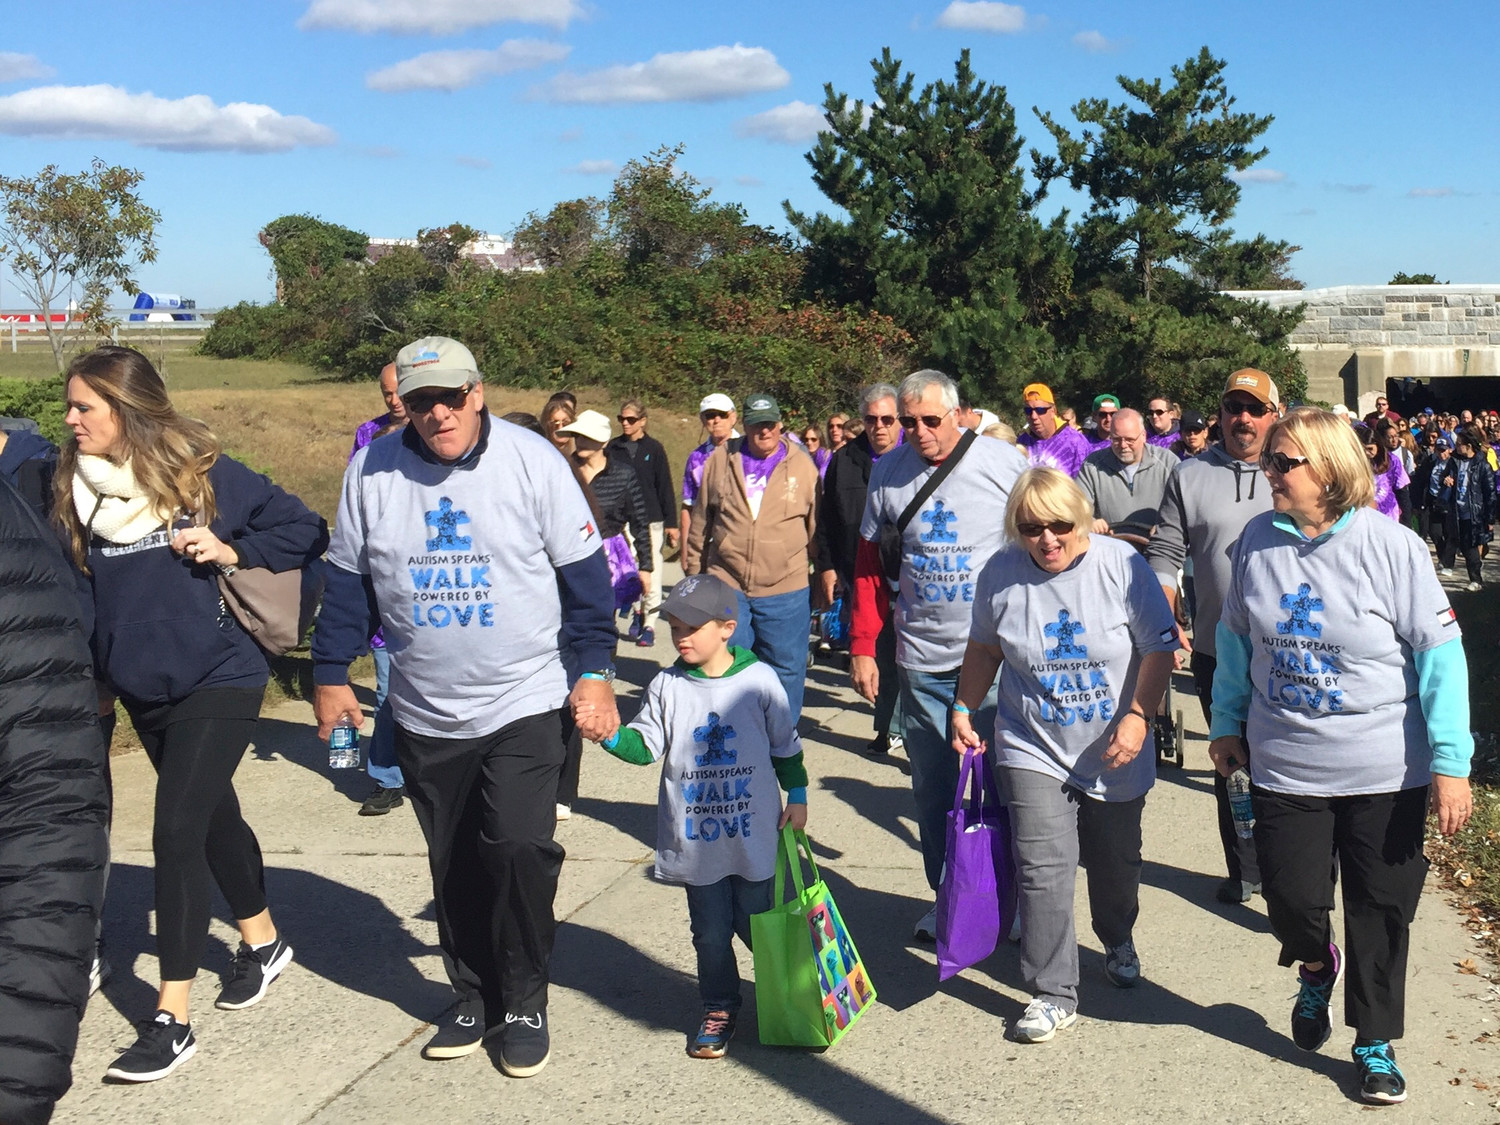 RVC Blue Speaks, above, raised about $47,000 for the Autism Speaks Walk at Jones Beach on Oct. 1